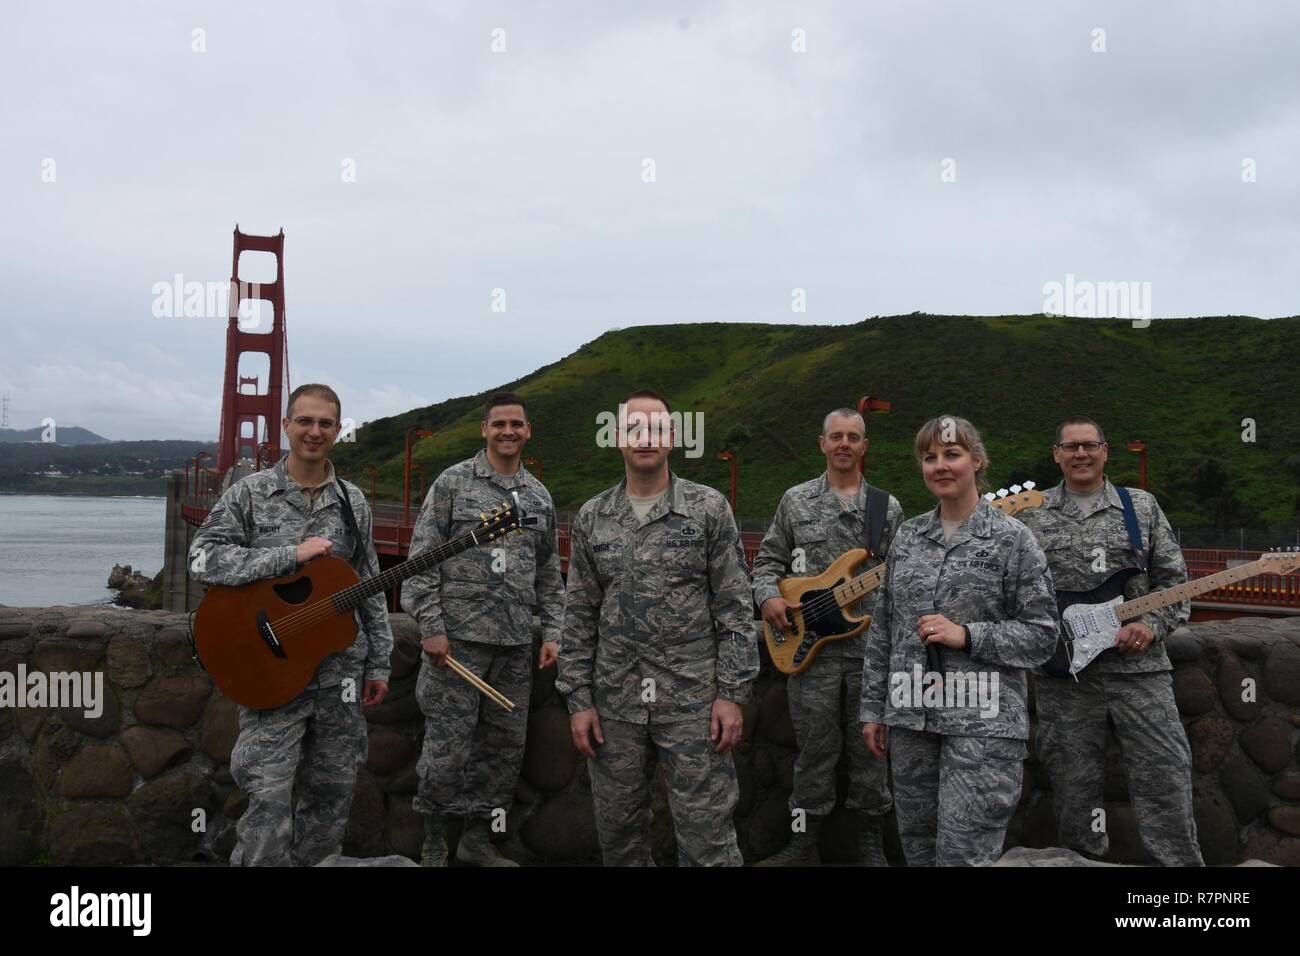 Mobility poses for a picture in front of the Golden Gate Bridge after the San Francisco Rock and Roll Marathon March 26. Pictured from left to right: Tech. Sgt. Clint Whitney, Senior Airman Bryan Smith, Master Sgt. Andrew Benton, Tech. Sgt. Sam Kennedy, Master Sgt. Paula Goetz, Tech Sgt. Paul Wells. Stock Photo